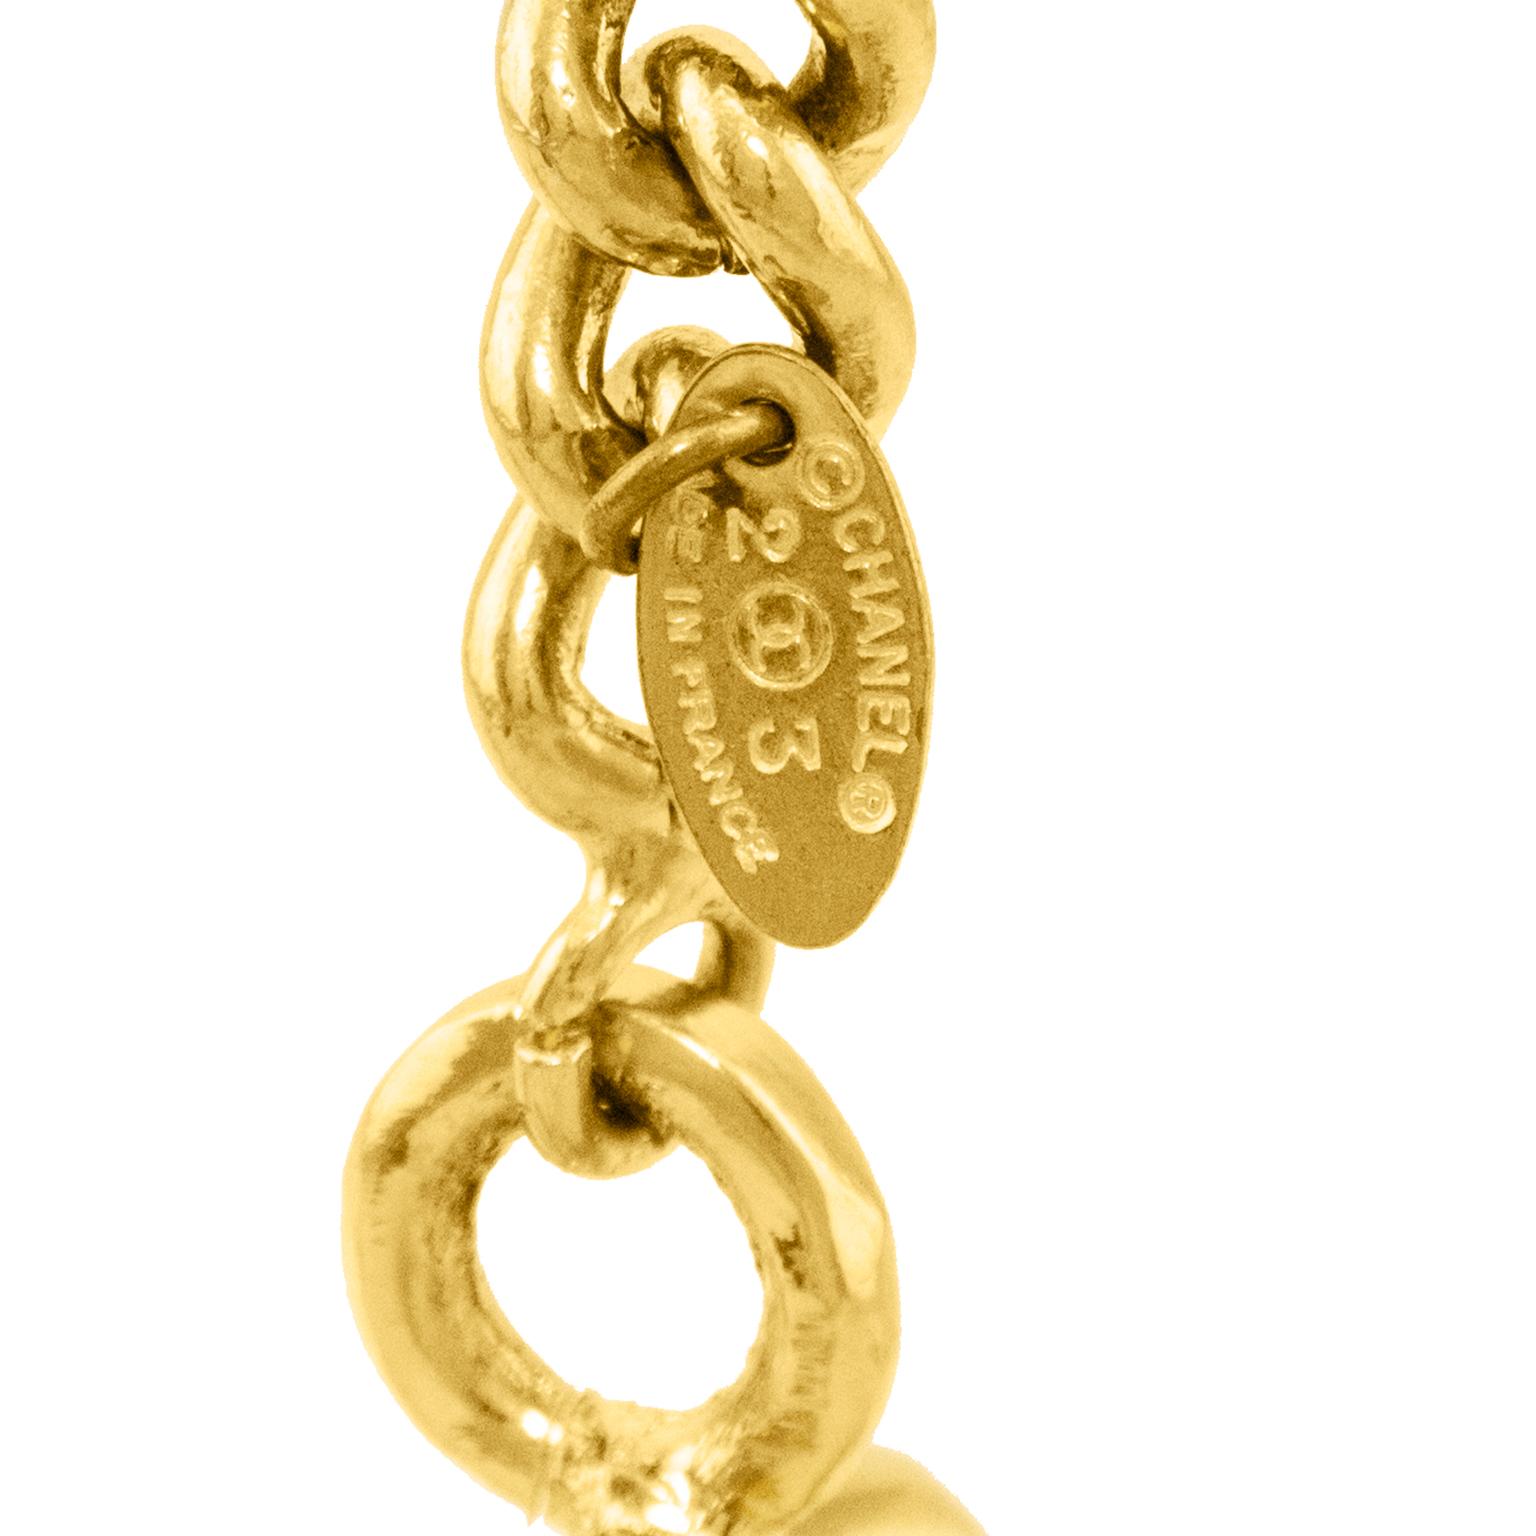 Women's or Men's 1984 Chanel Rue Cambon Stamped Coin Keychain